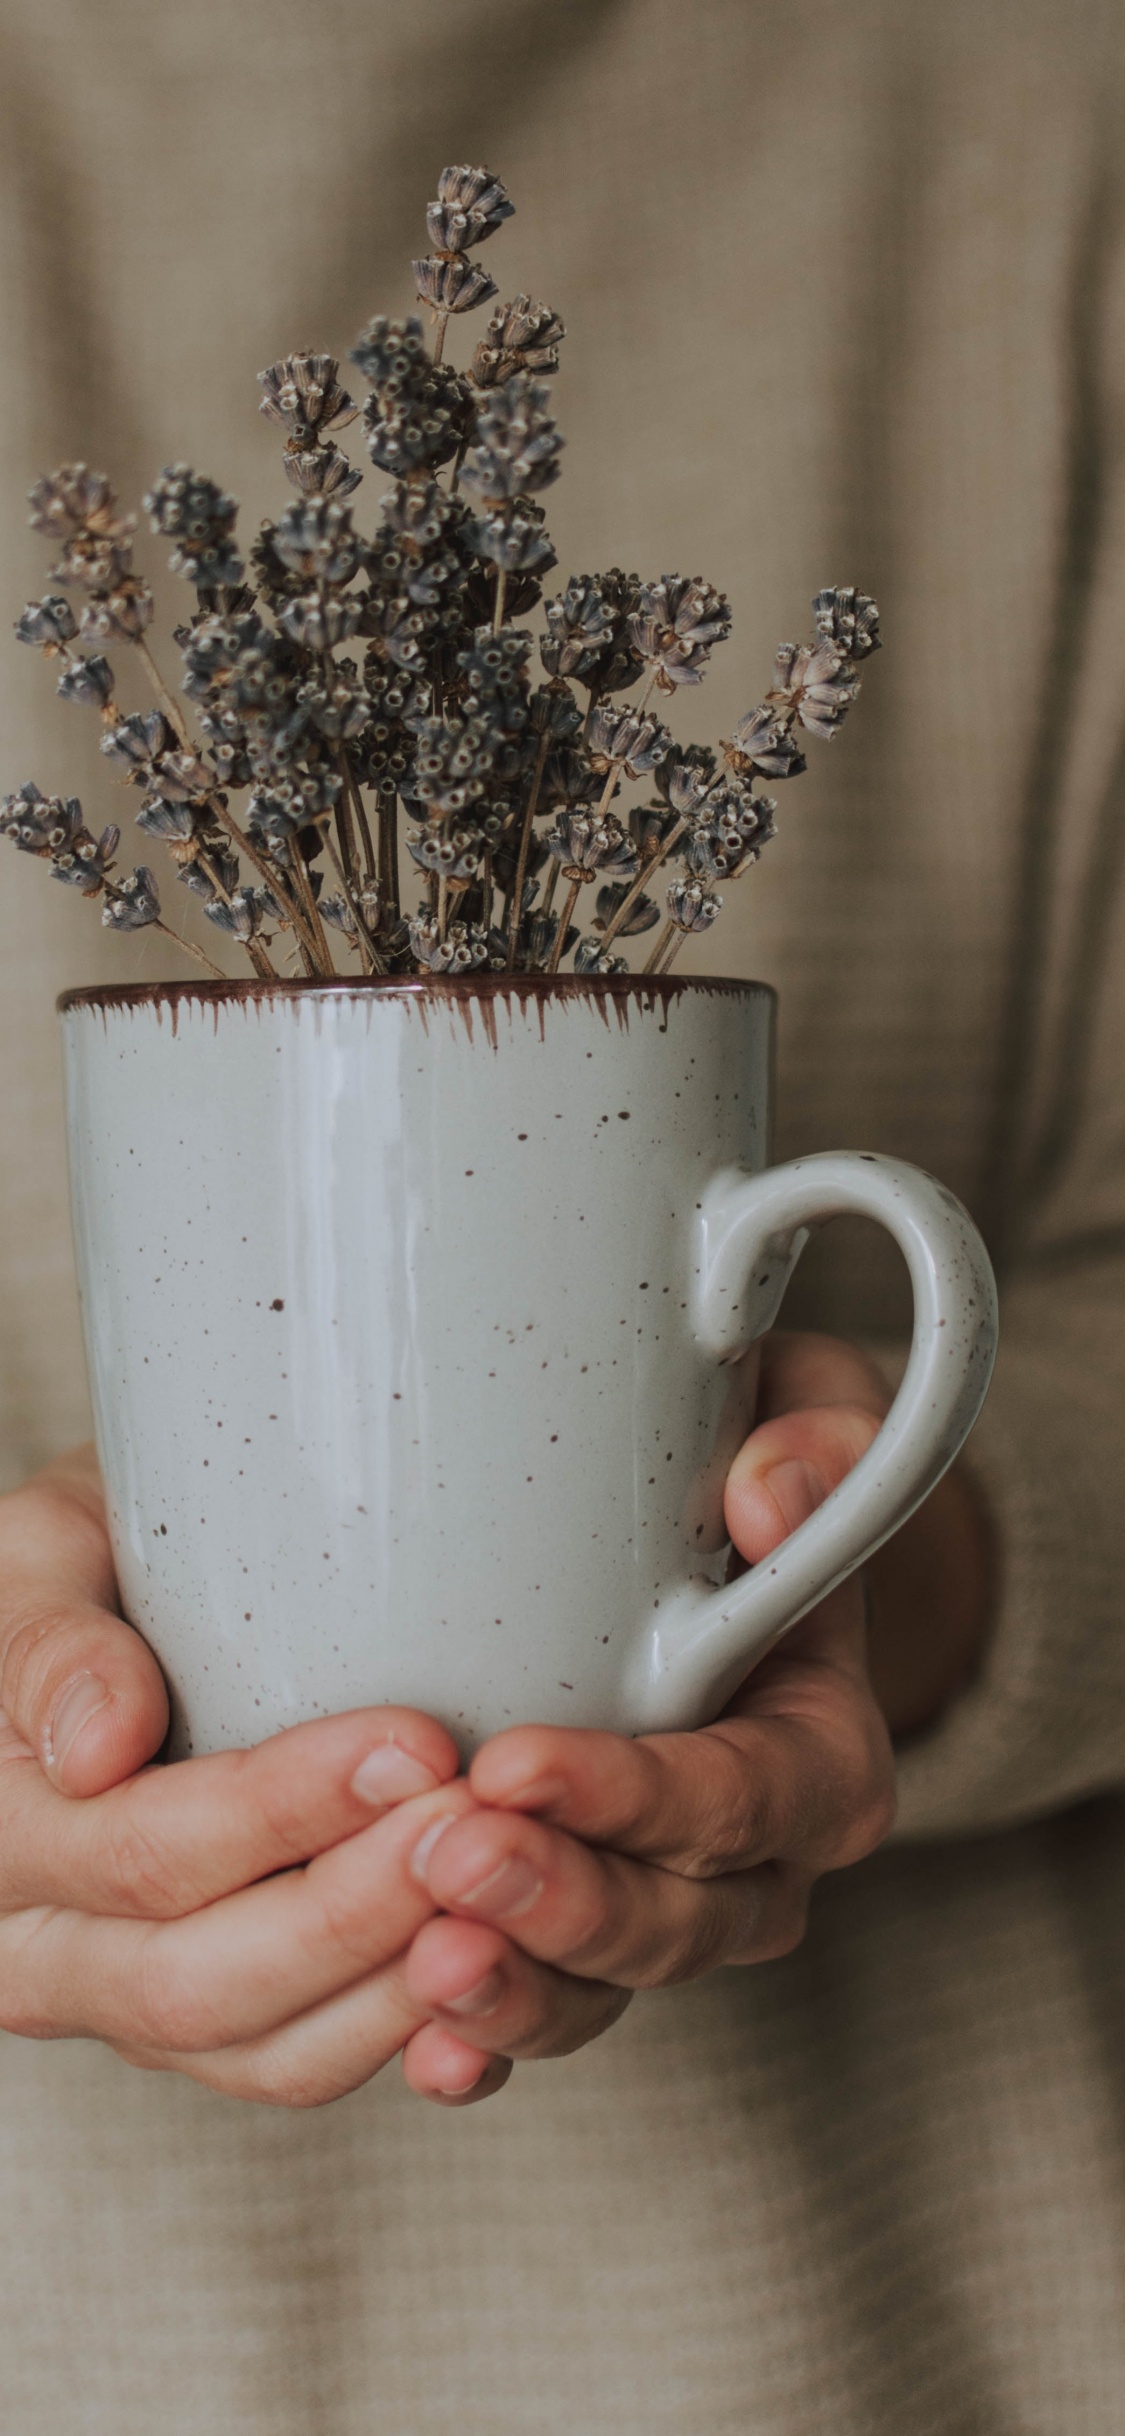 Person Holding White Ceramic Mug With Brown and White Flowers. Wallpaper in 1125x2436 Resolution